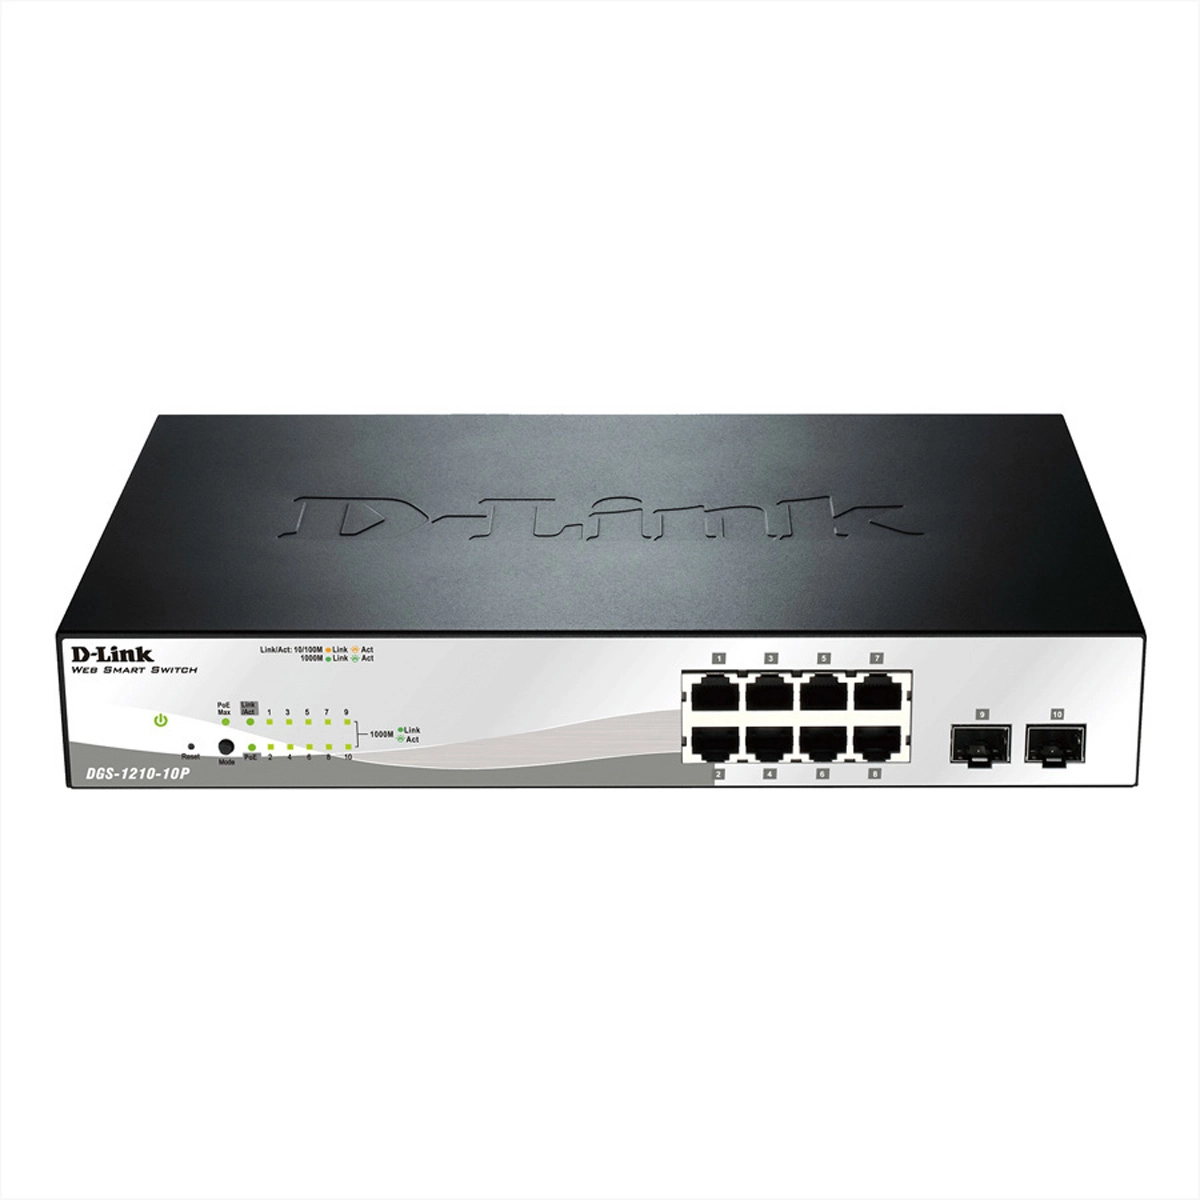 D-Link PoE Switch DGS-1210-10P 10 Port - Switch - 1 Gbps